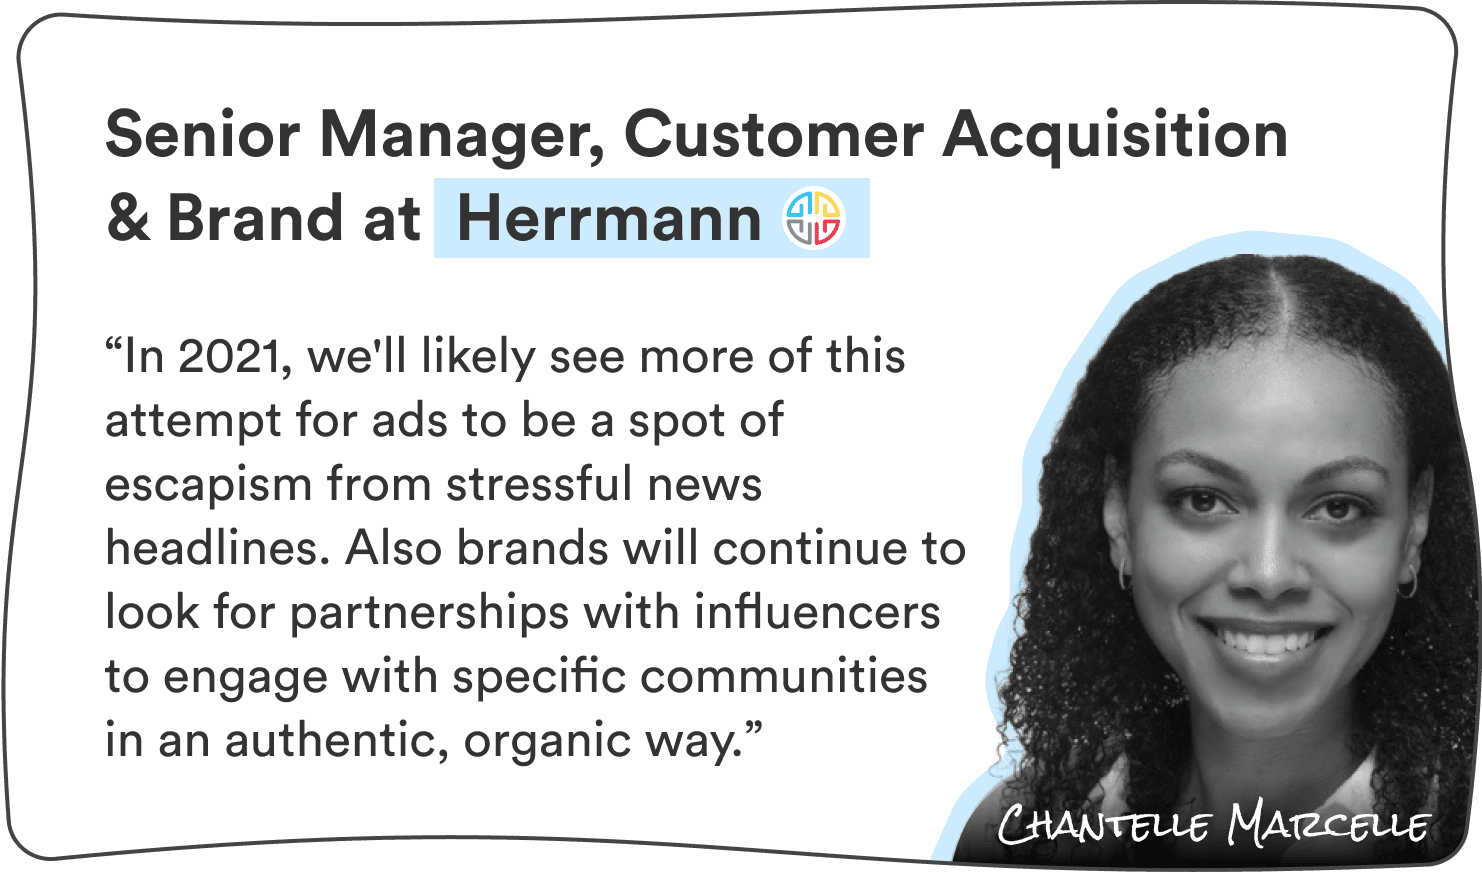 Chantelle Marcelle, Sr. Manager, Customer Acquisition & Brand at Herrmann: “In 2021, we’ll likely see more of this attempt for ads to be a spot of escapism from stressful news headlines. Also brands will continue to look for partnerships with influencers to engage with specific communities in an authentic, organic way.”